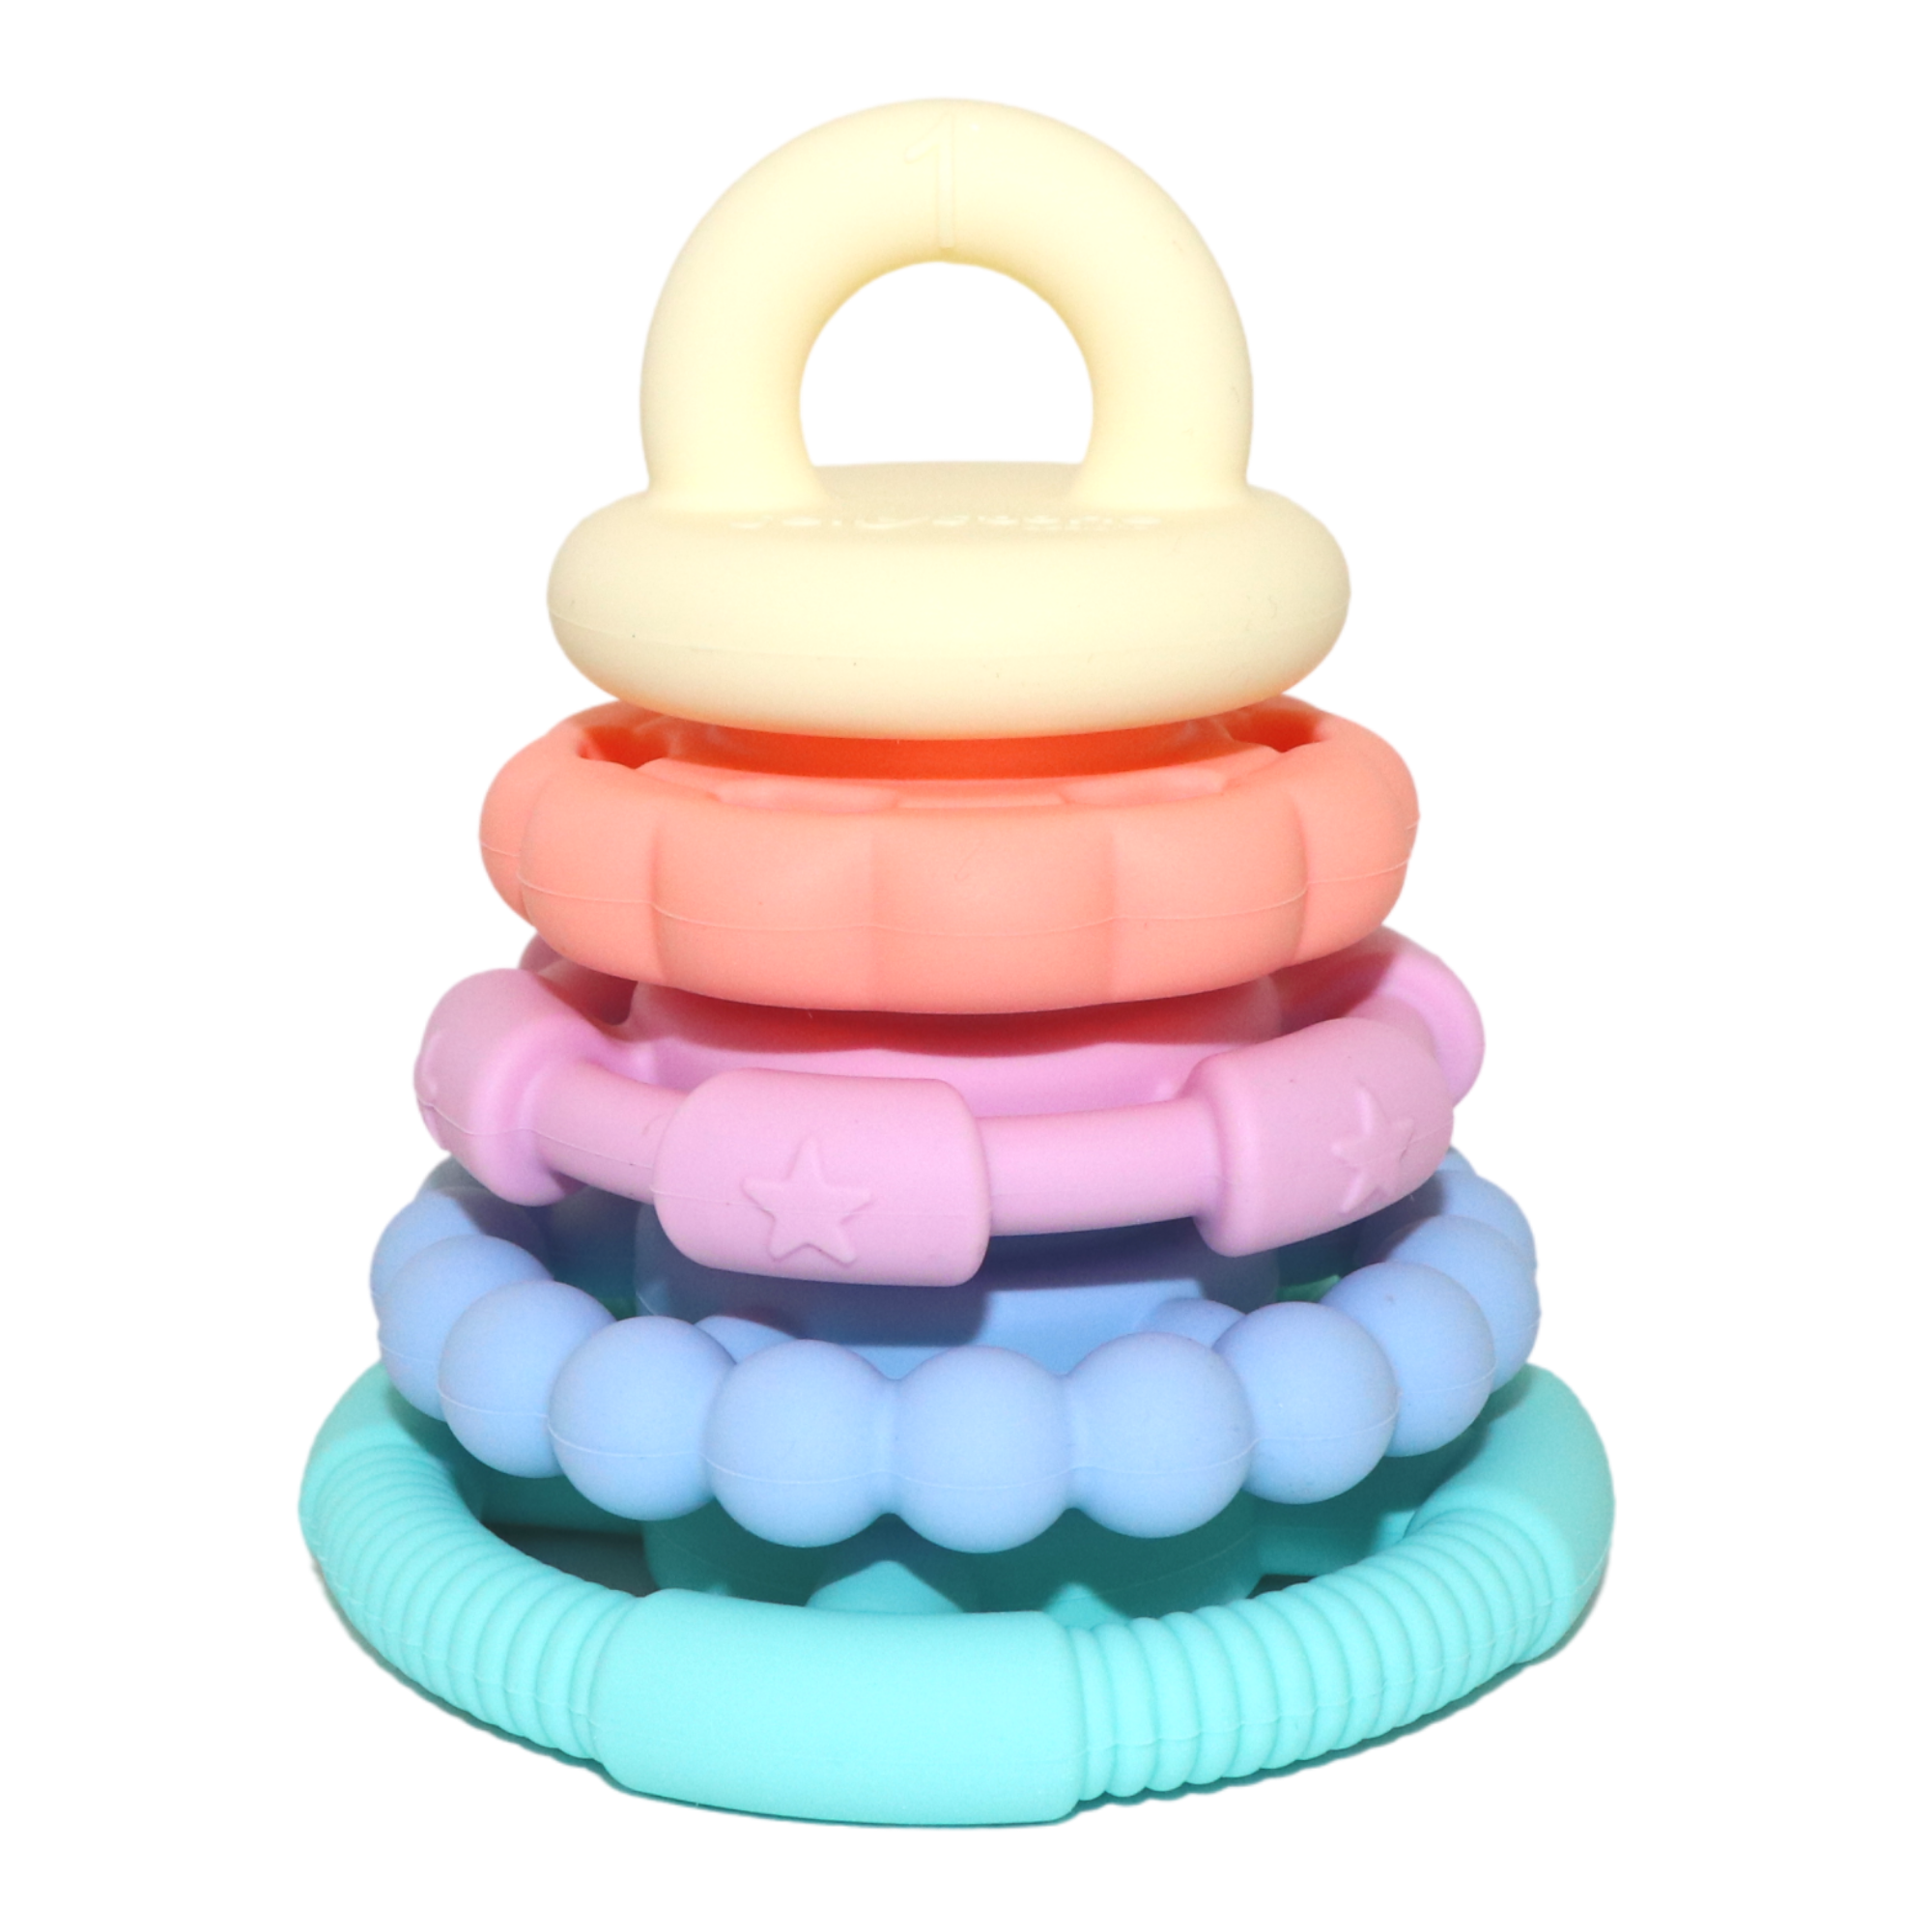 Jellystone - Rainbow Stacker and Teether Toy